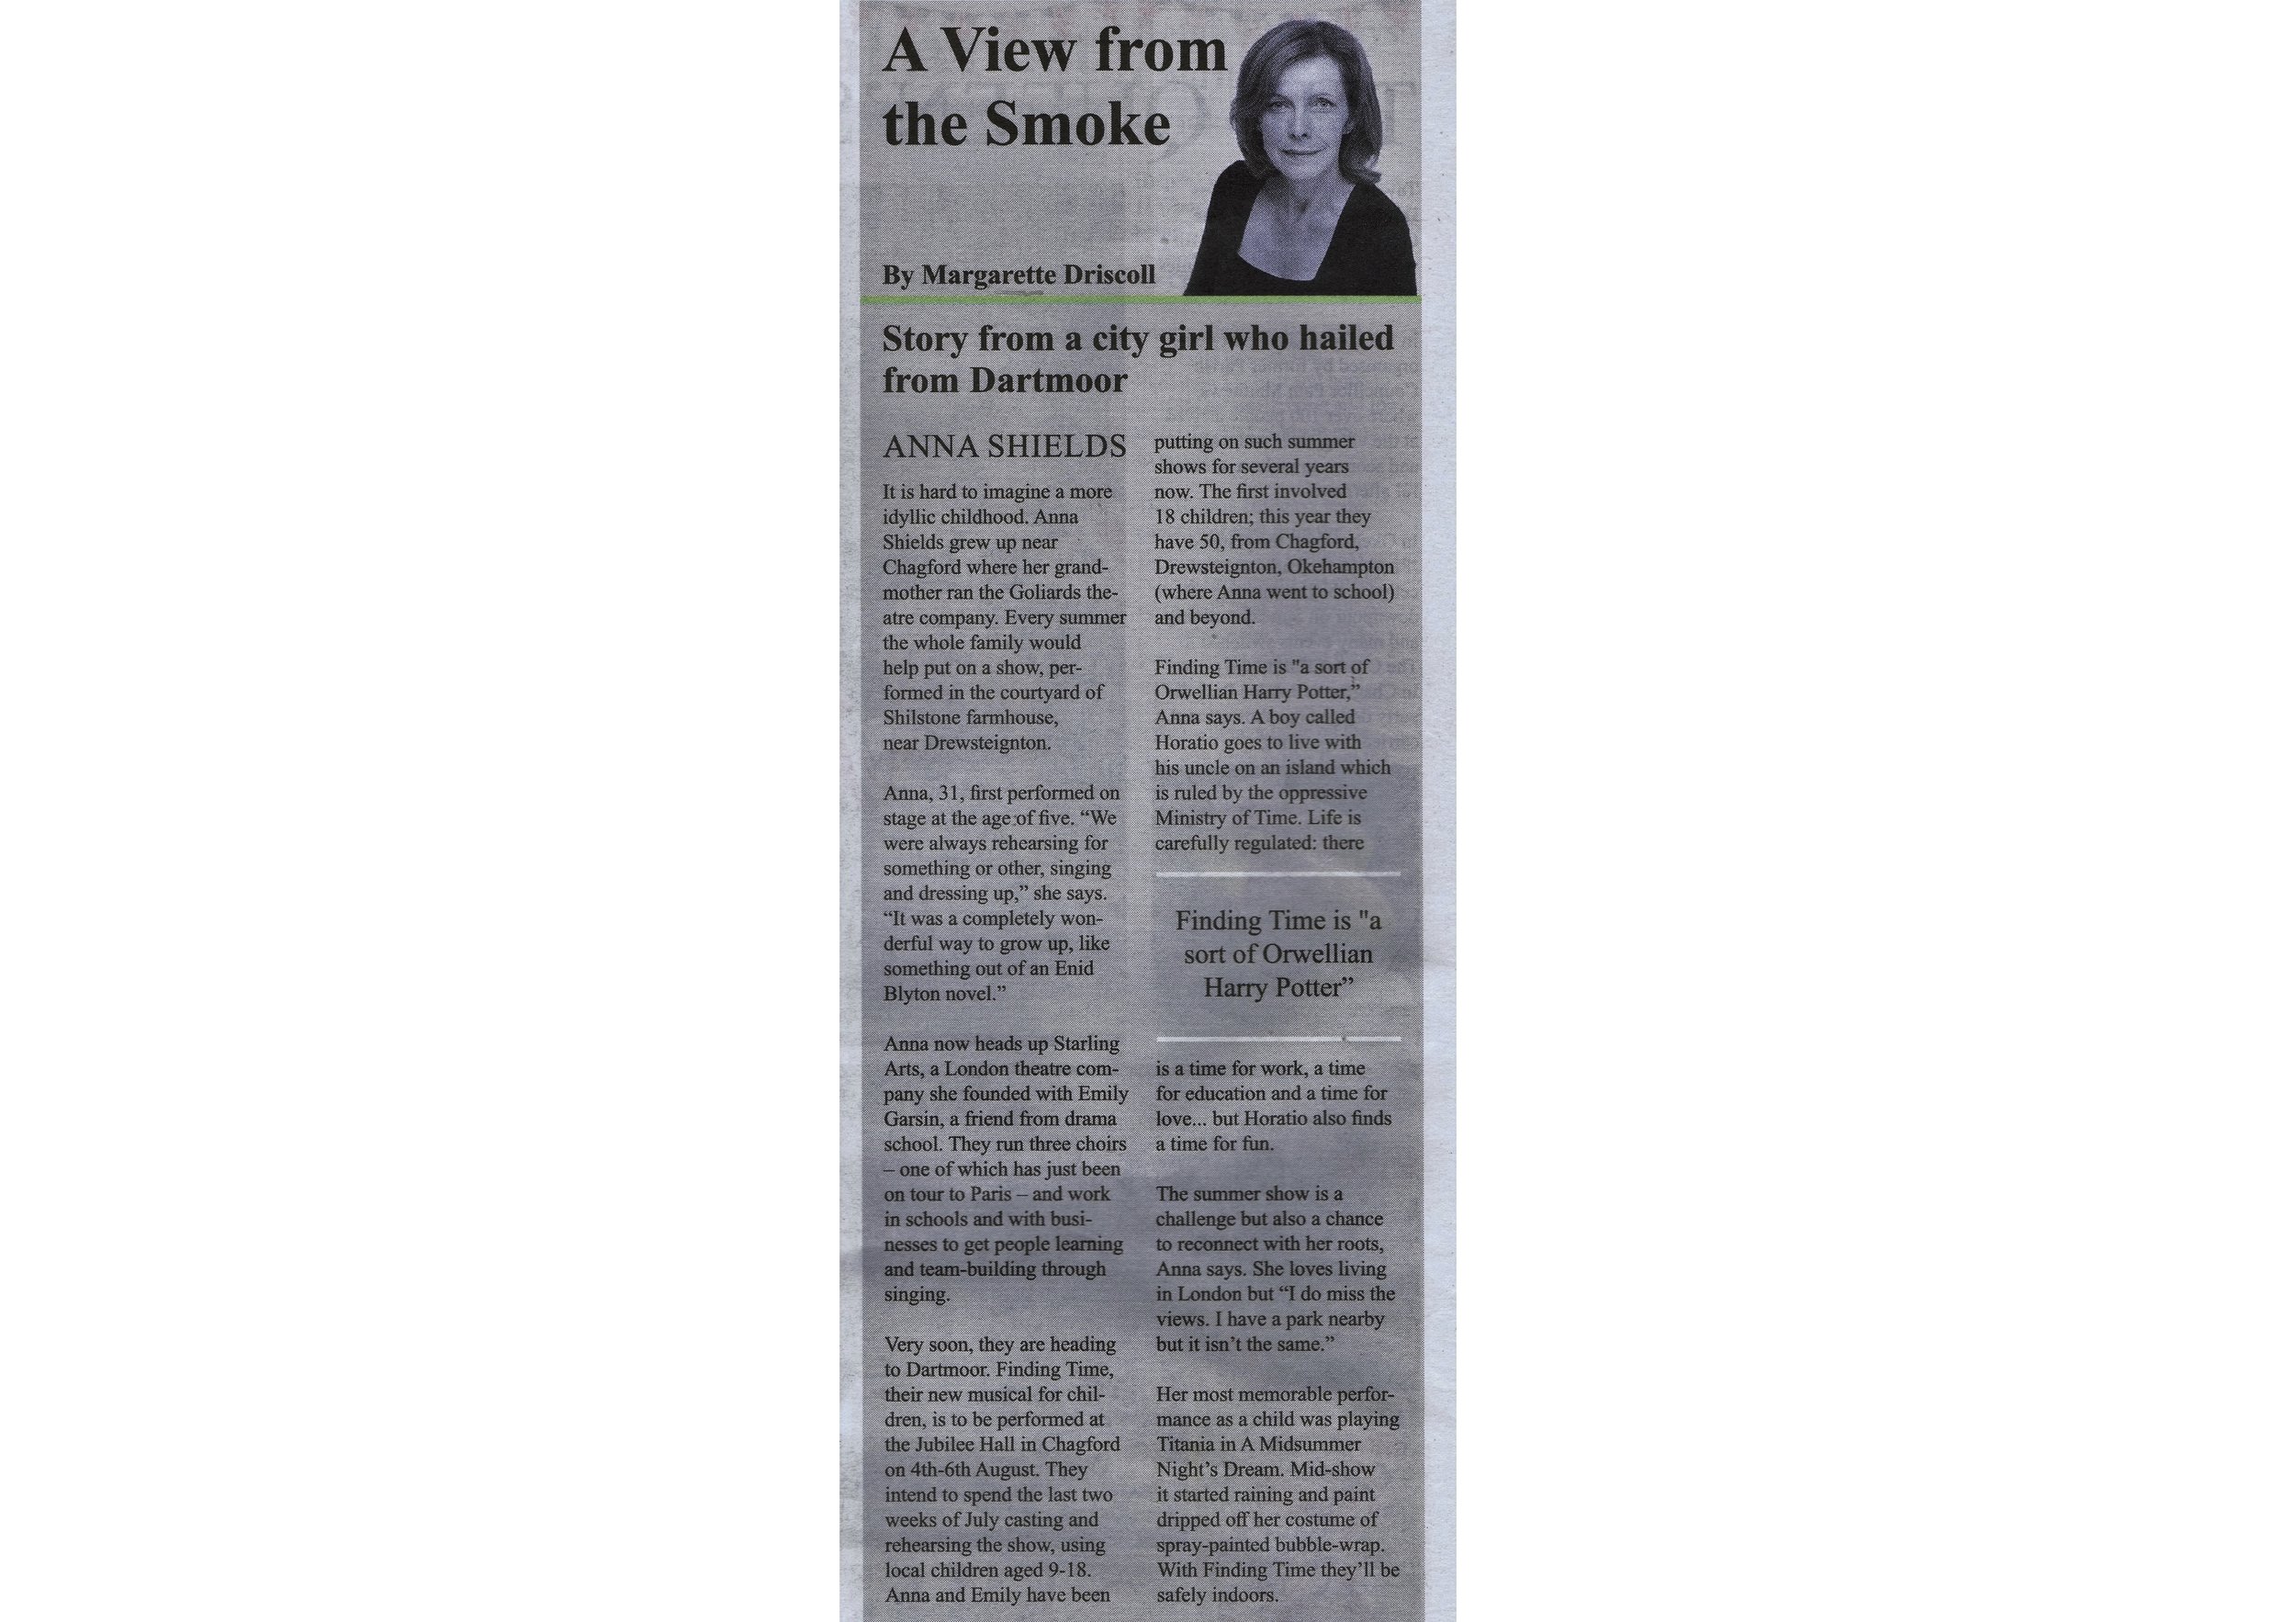 Interview with Anna by Magarette Driscoll in The Moorlander paper